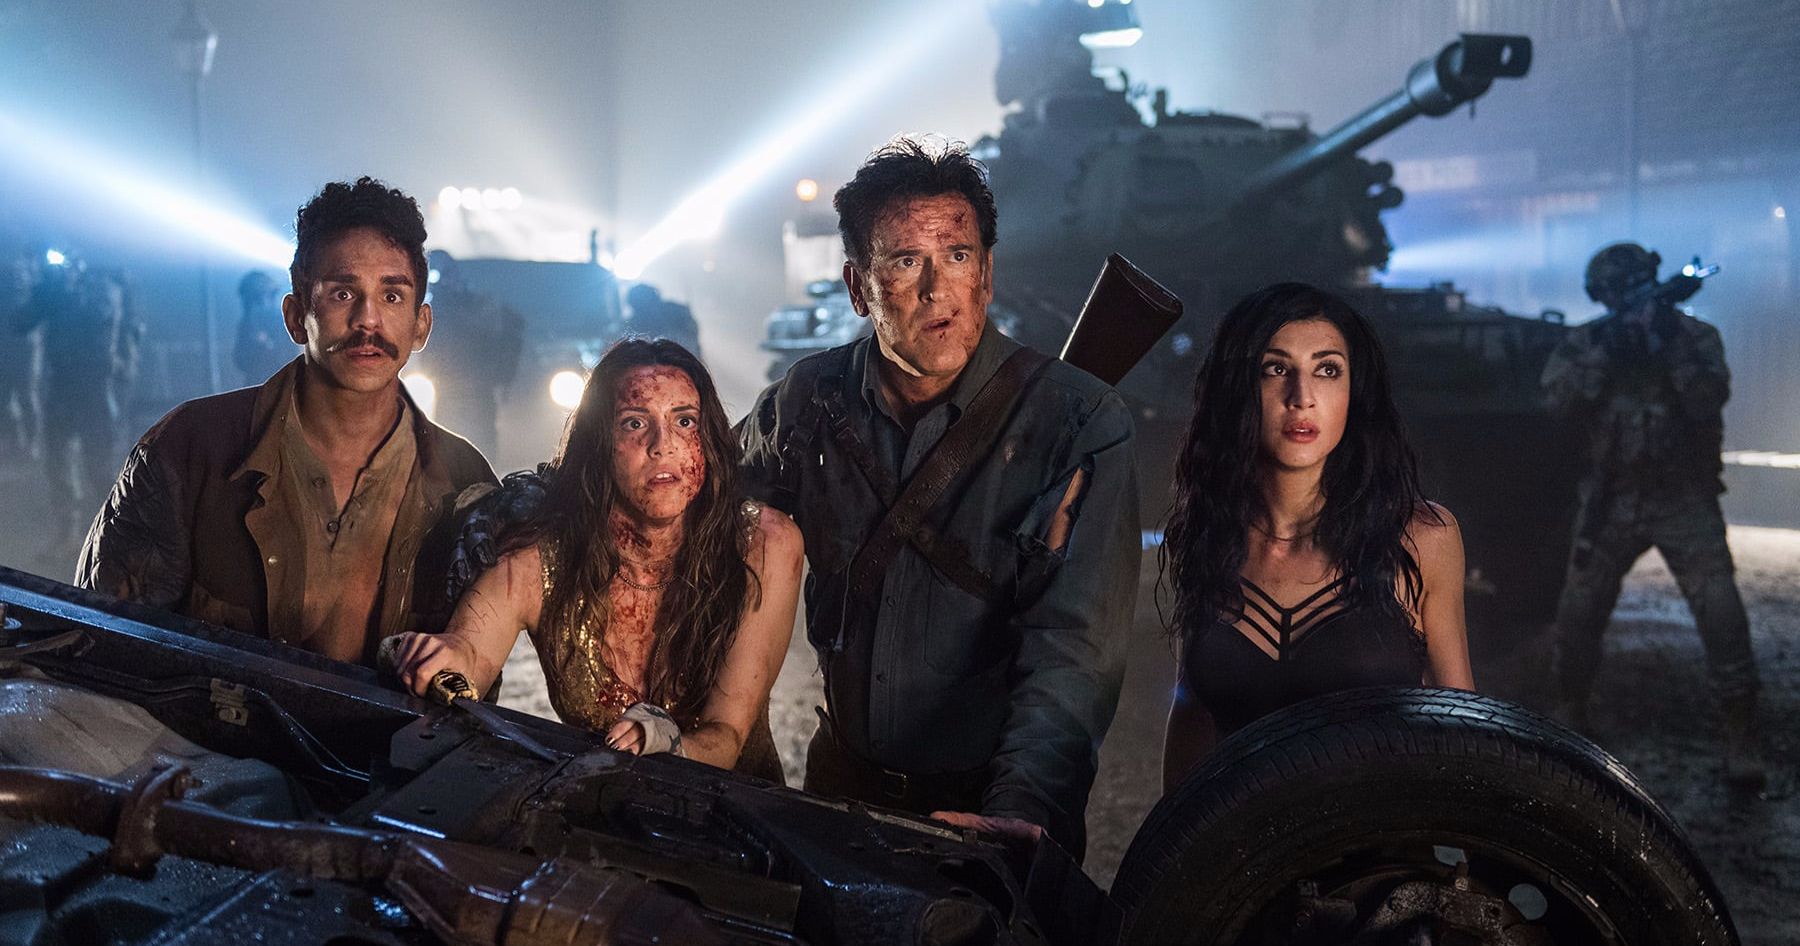 Ash Vs. Evil Dead Stars Believe They Can Convince Bruce Campbell to Do Season 4